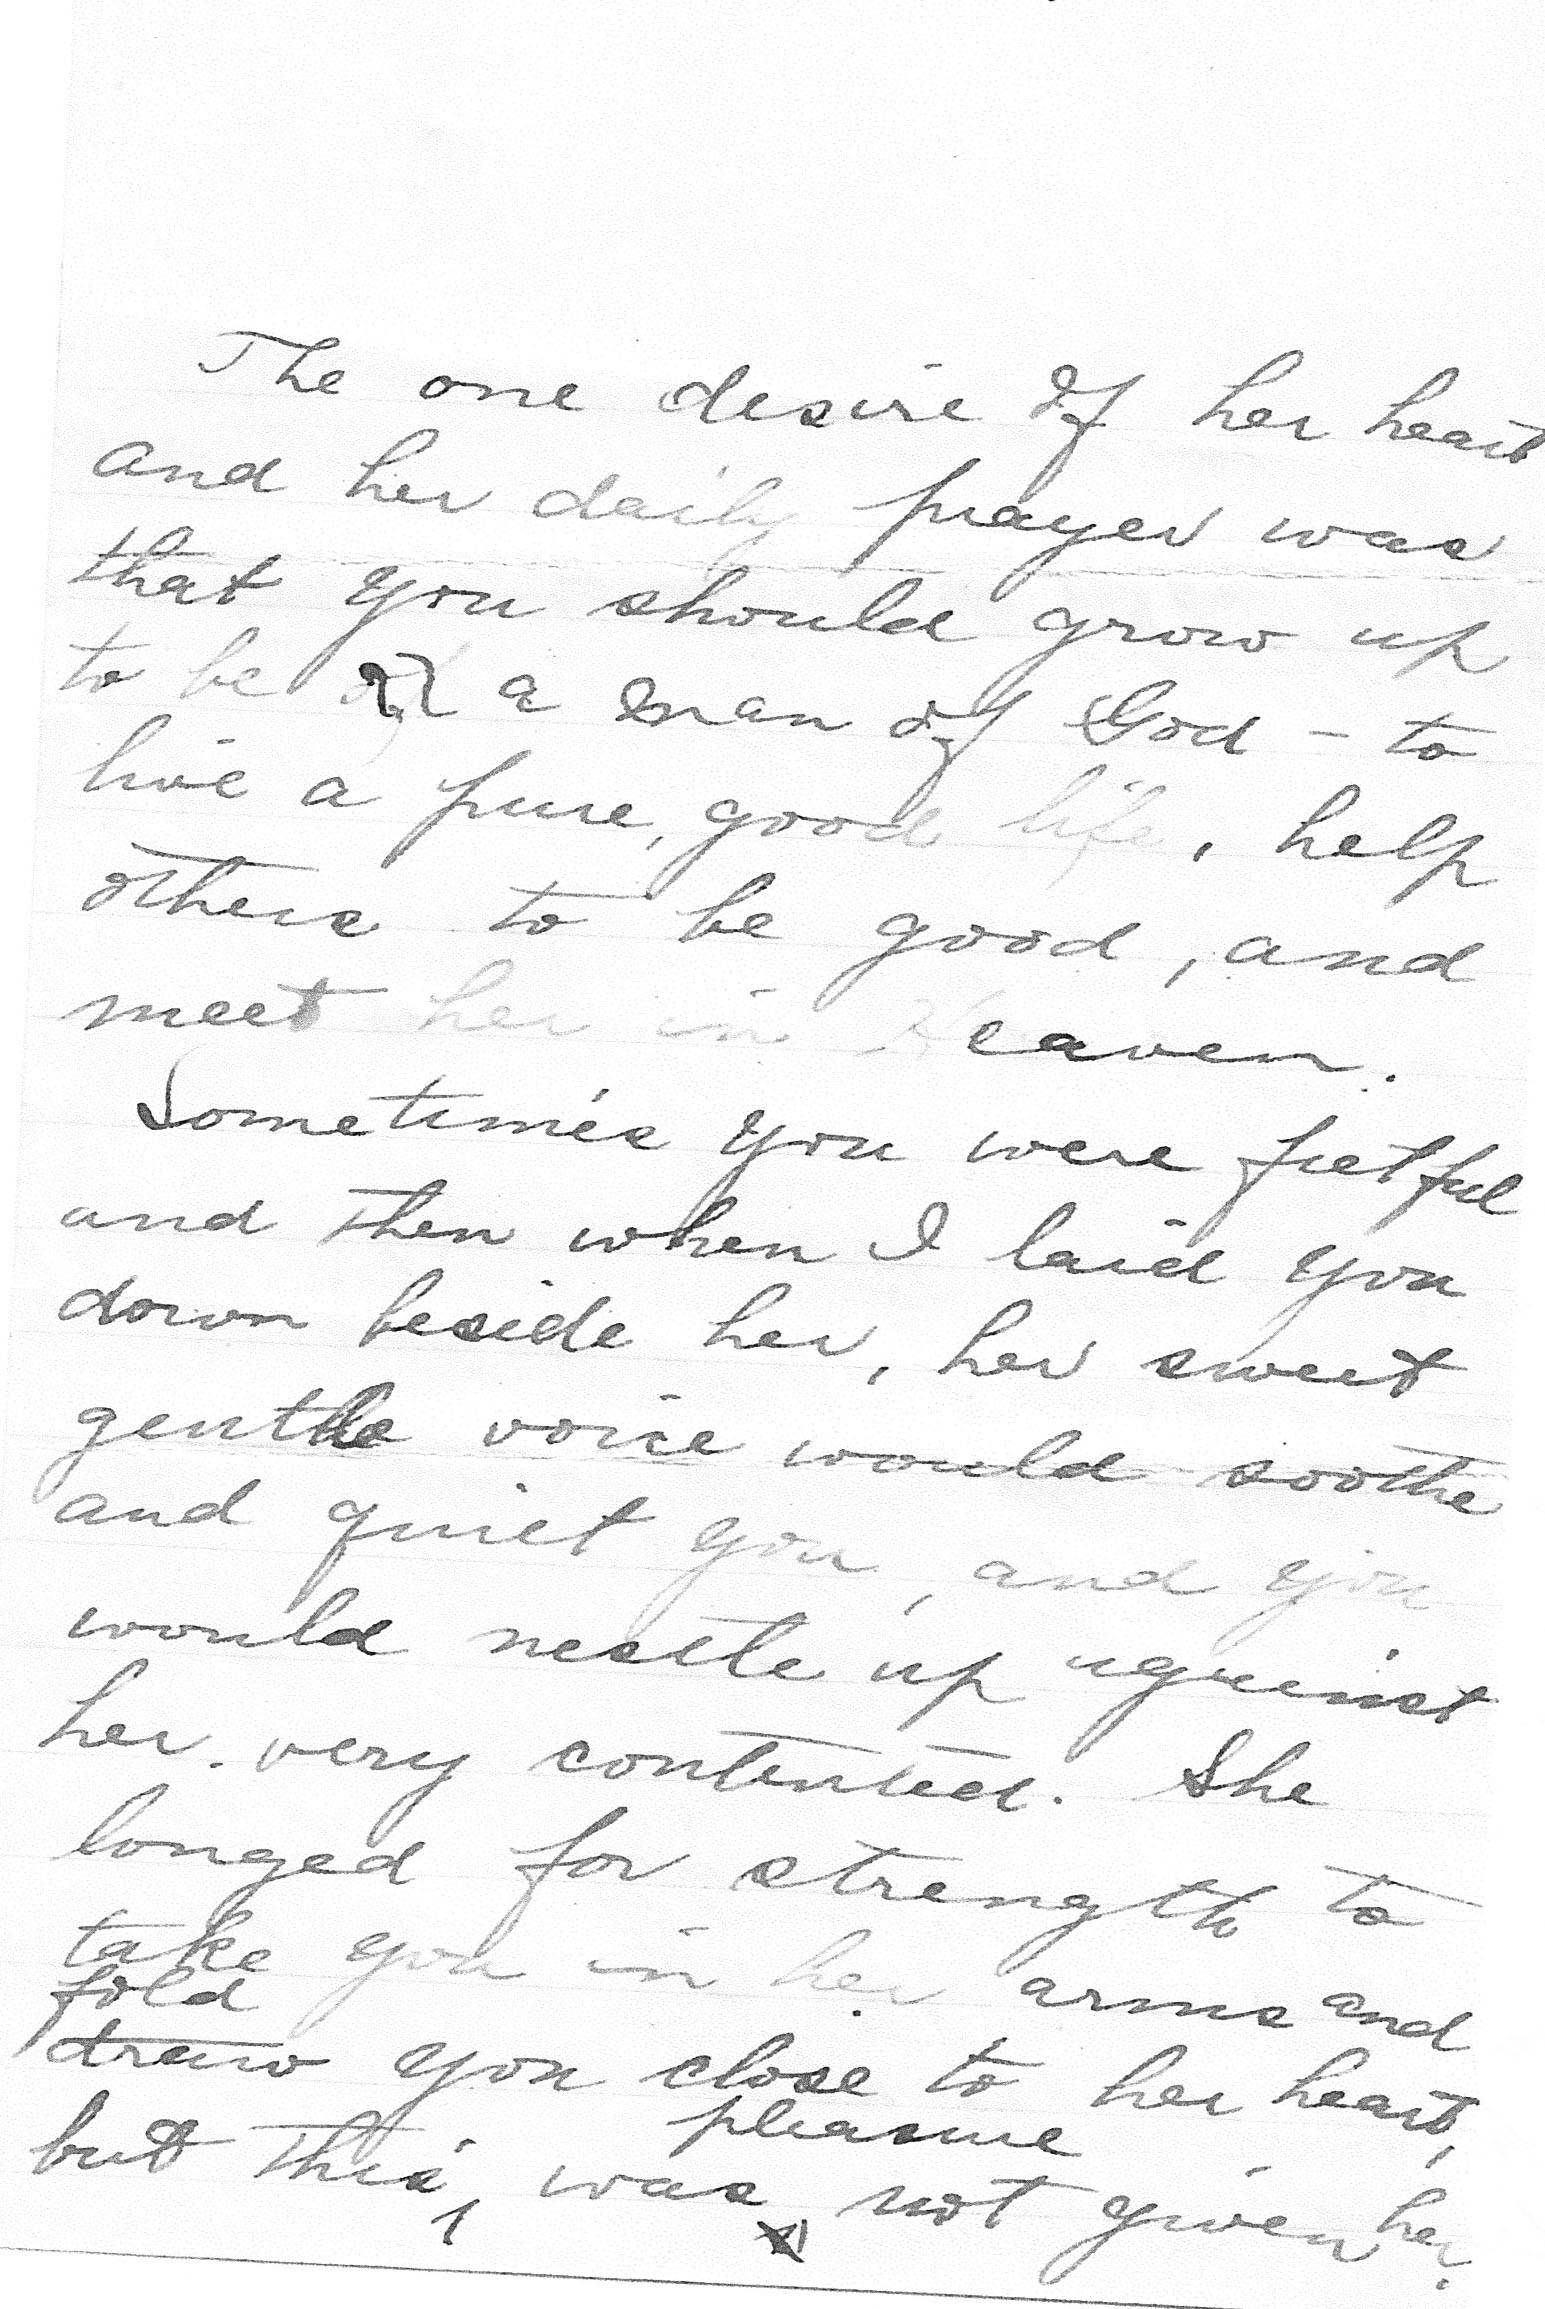 Letter to Horace page 4